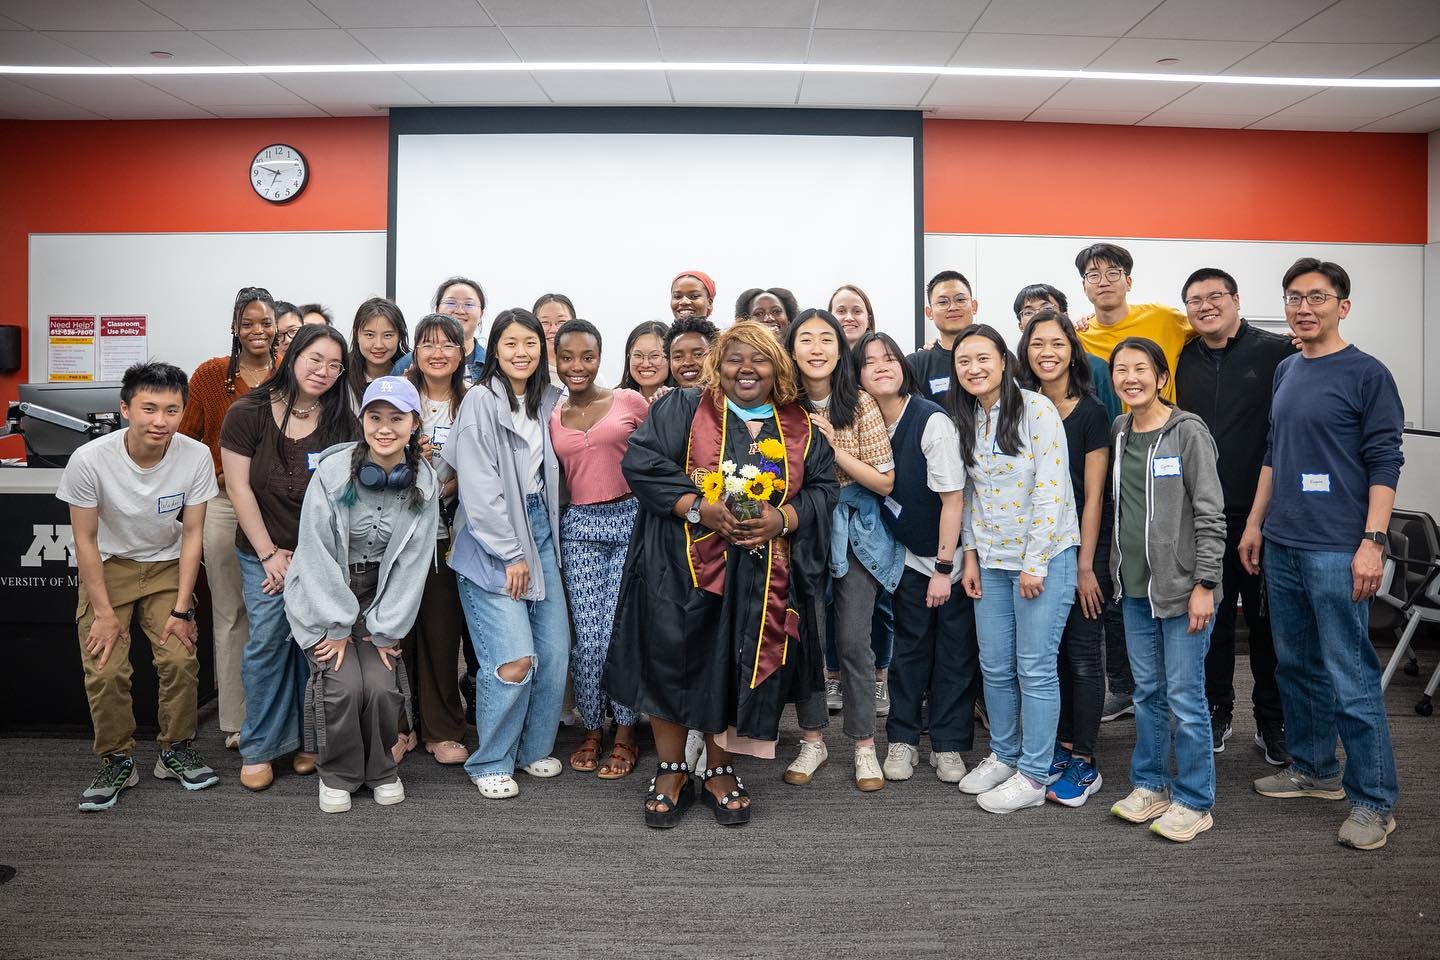 This past weekend we had our end-of-semester bible study and celebrated some of our friends&rsquo; graduation!🥳
.
.
.
#internationalstudents #riseatumn #riseumn #riselife #globalgophers #universityofminnesota #gogophers #umn #biblestudy #graduation 